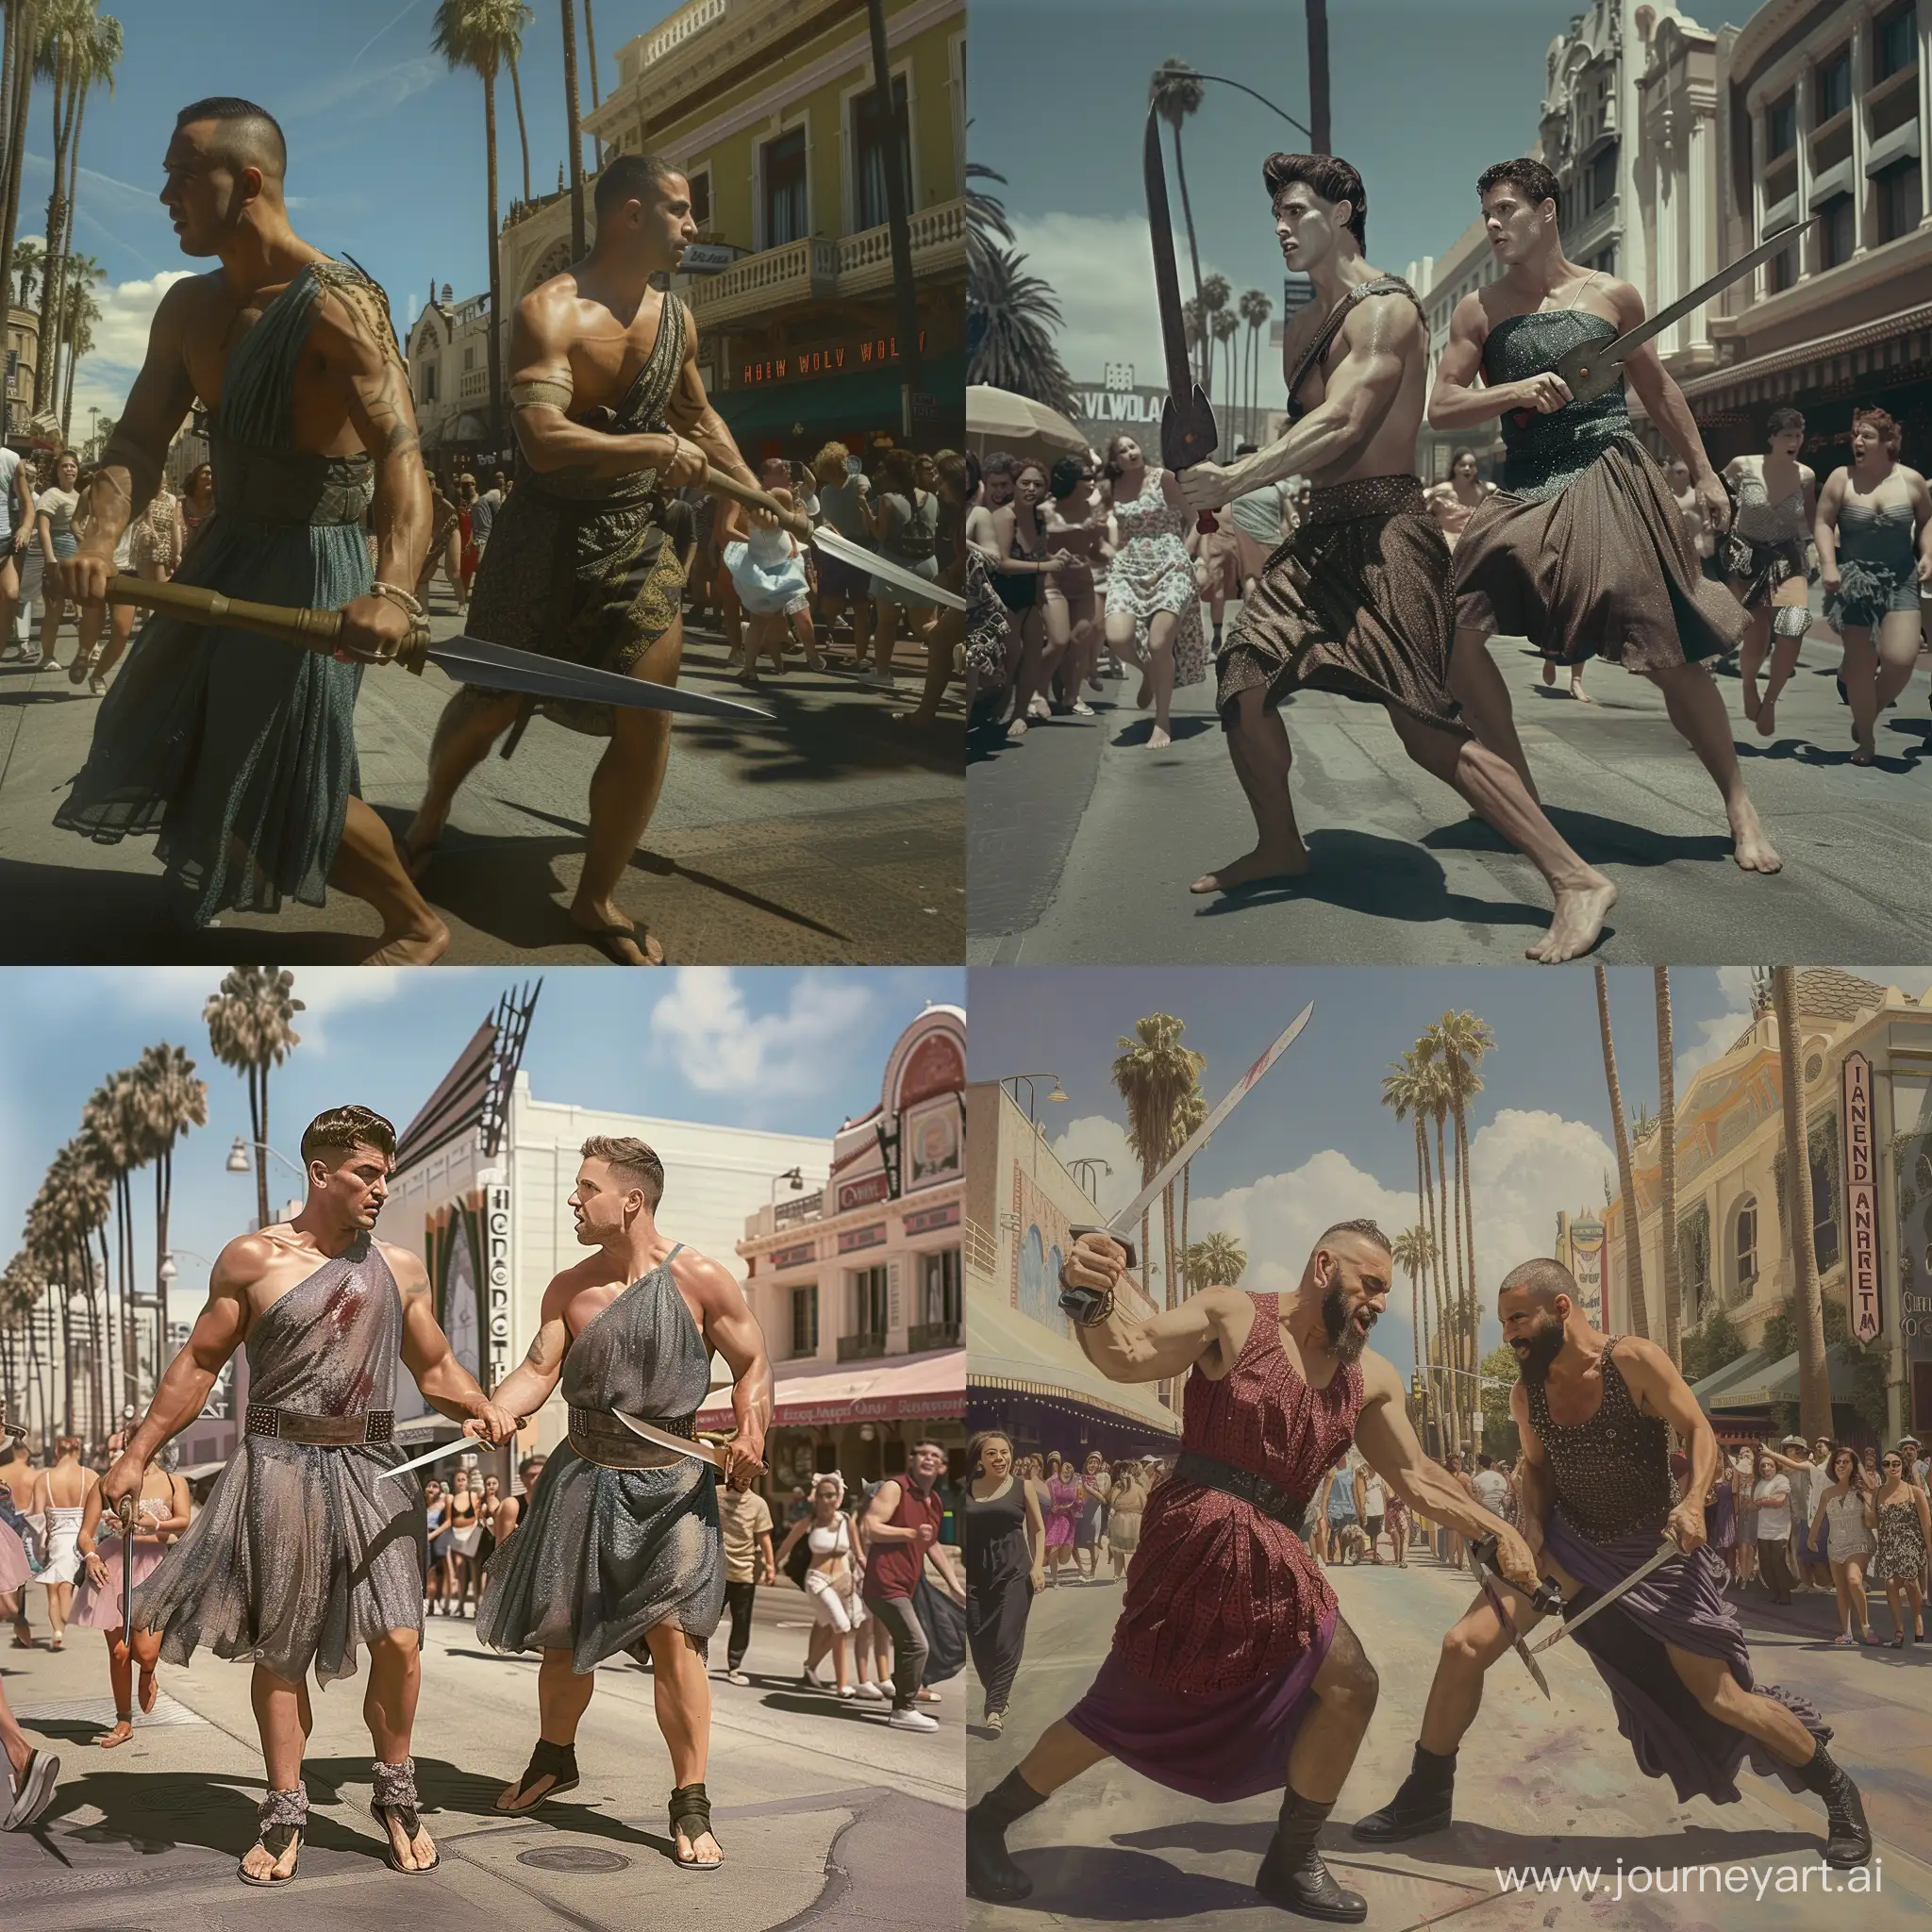 Startling-Hollywood-Boulevard-Scene-Men-in-Dresses-with-Knives-Chase-Tourists